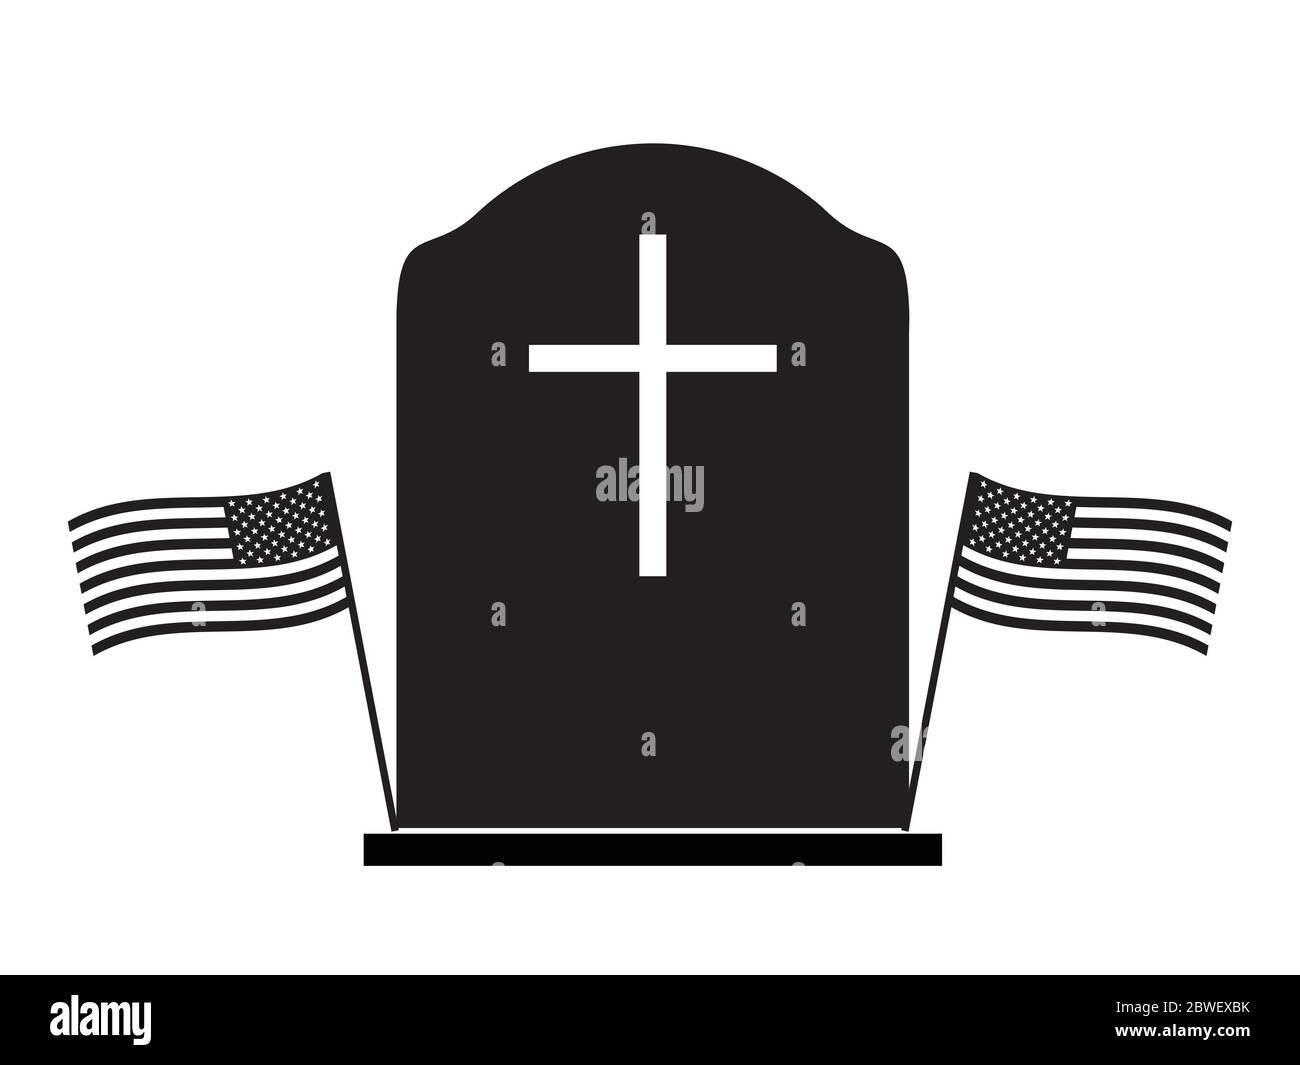 Memorial Day Tombstone with Two US Flags. Black and white pictogram depicting tombstone with two American Flags beside. Vecor File Stock Vector